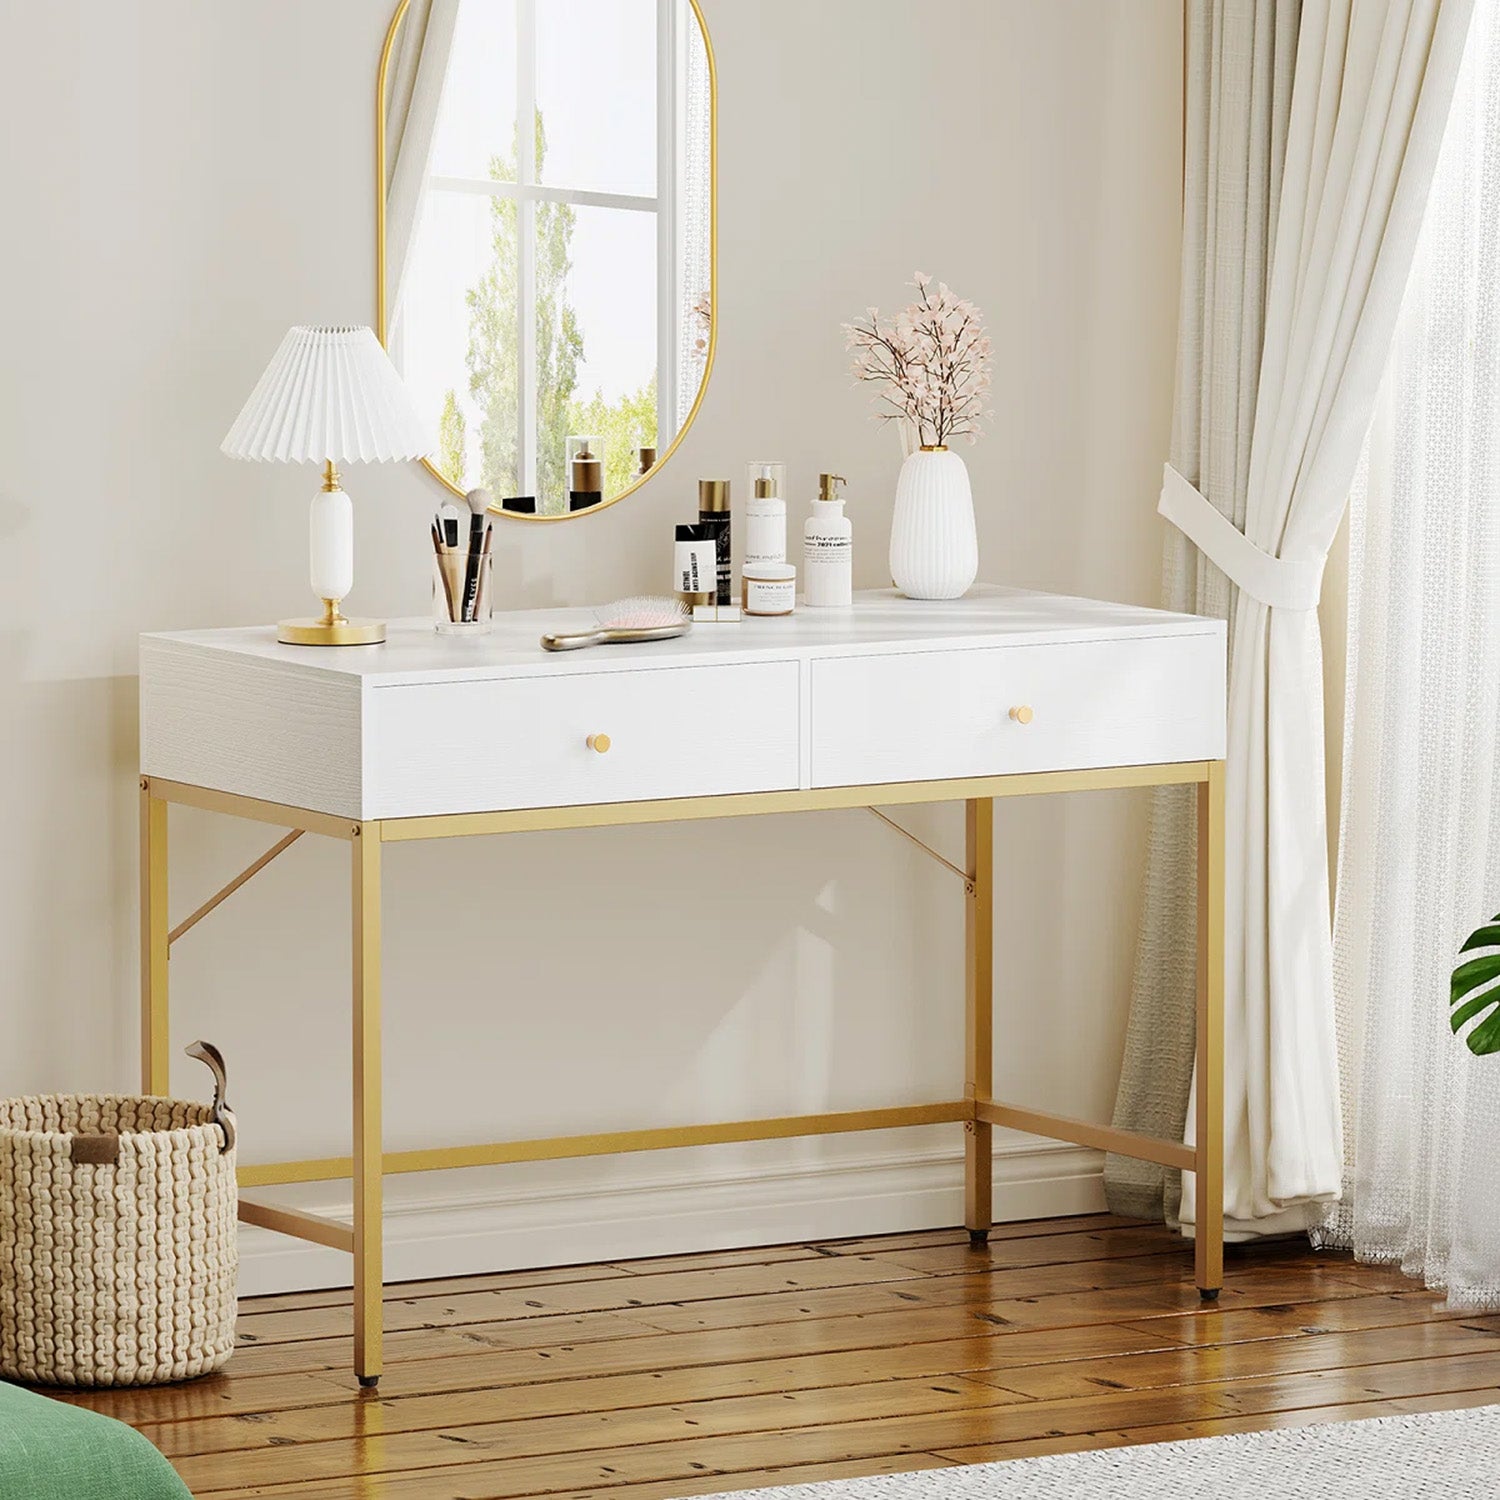 A modernized white table with two drawers and mirror